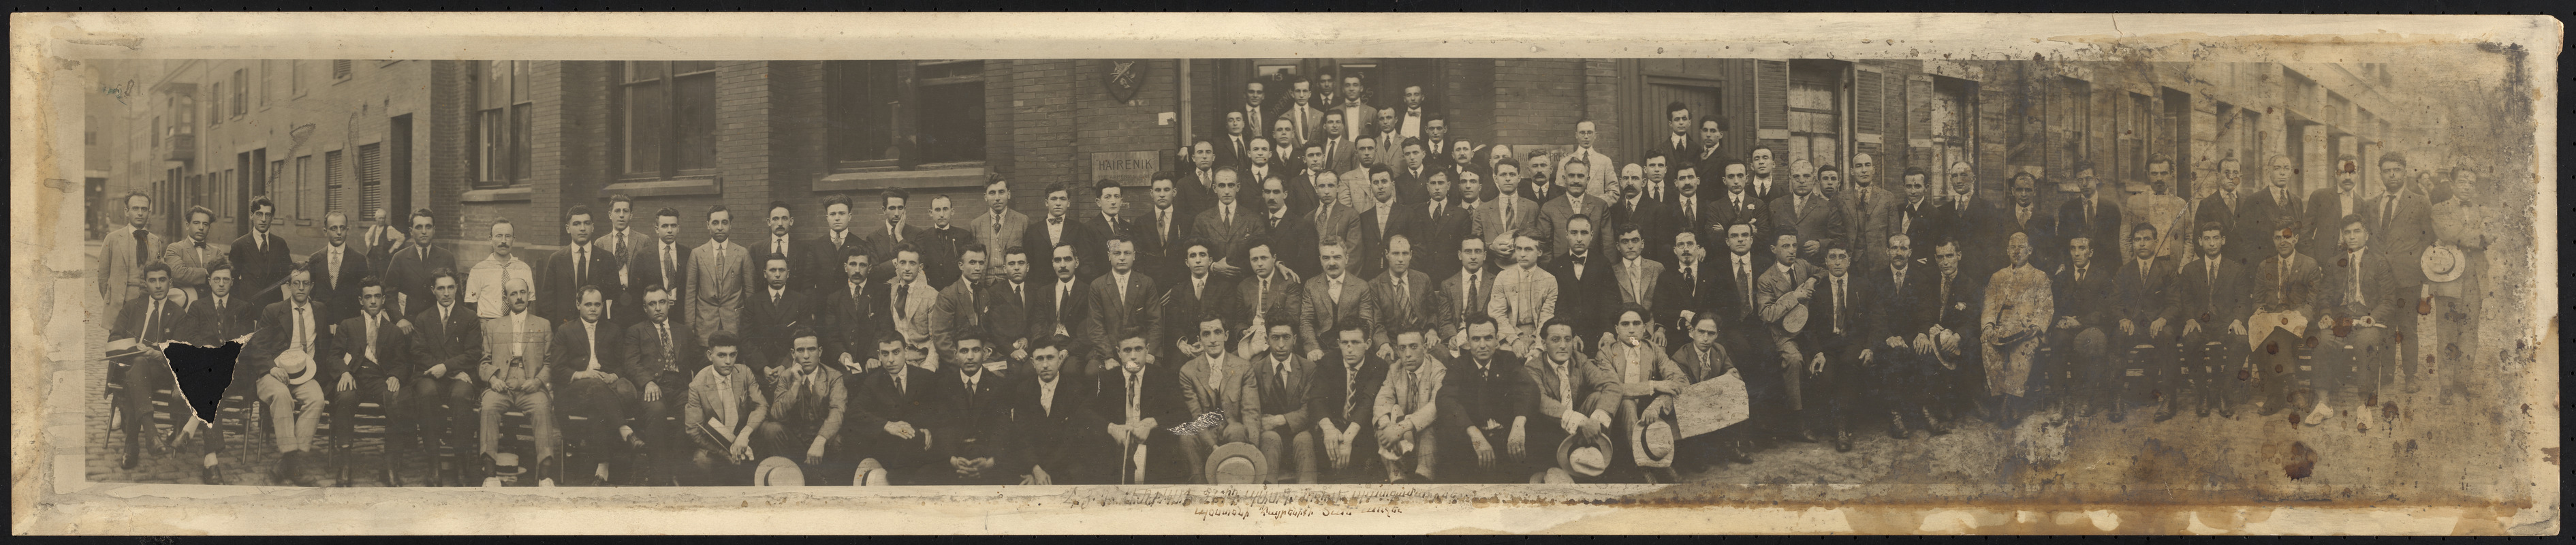 The delegates of the A.R.F. (Armenian Revolutionary Federation) America 26th convention in front of the Hairenik House in Boston